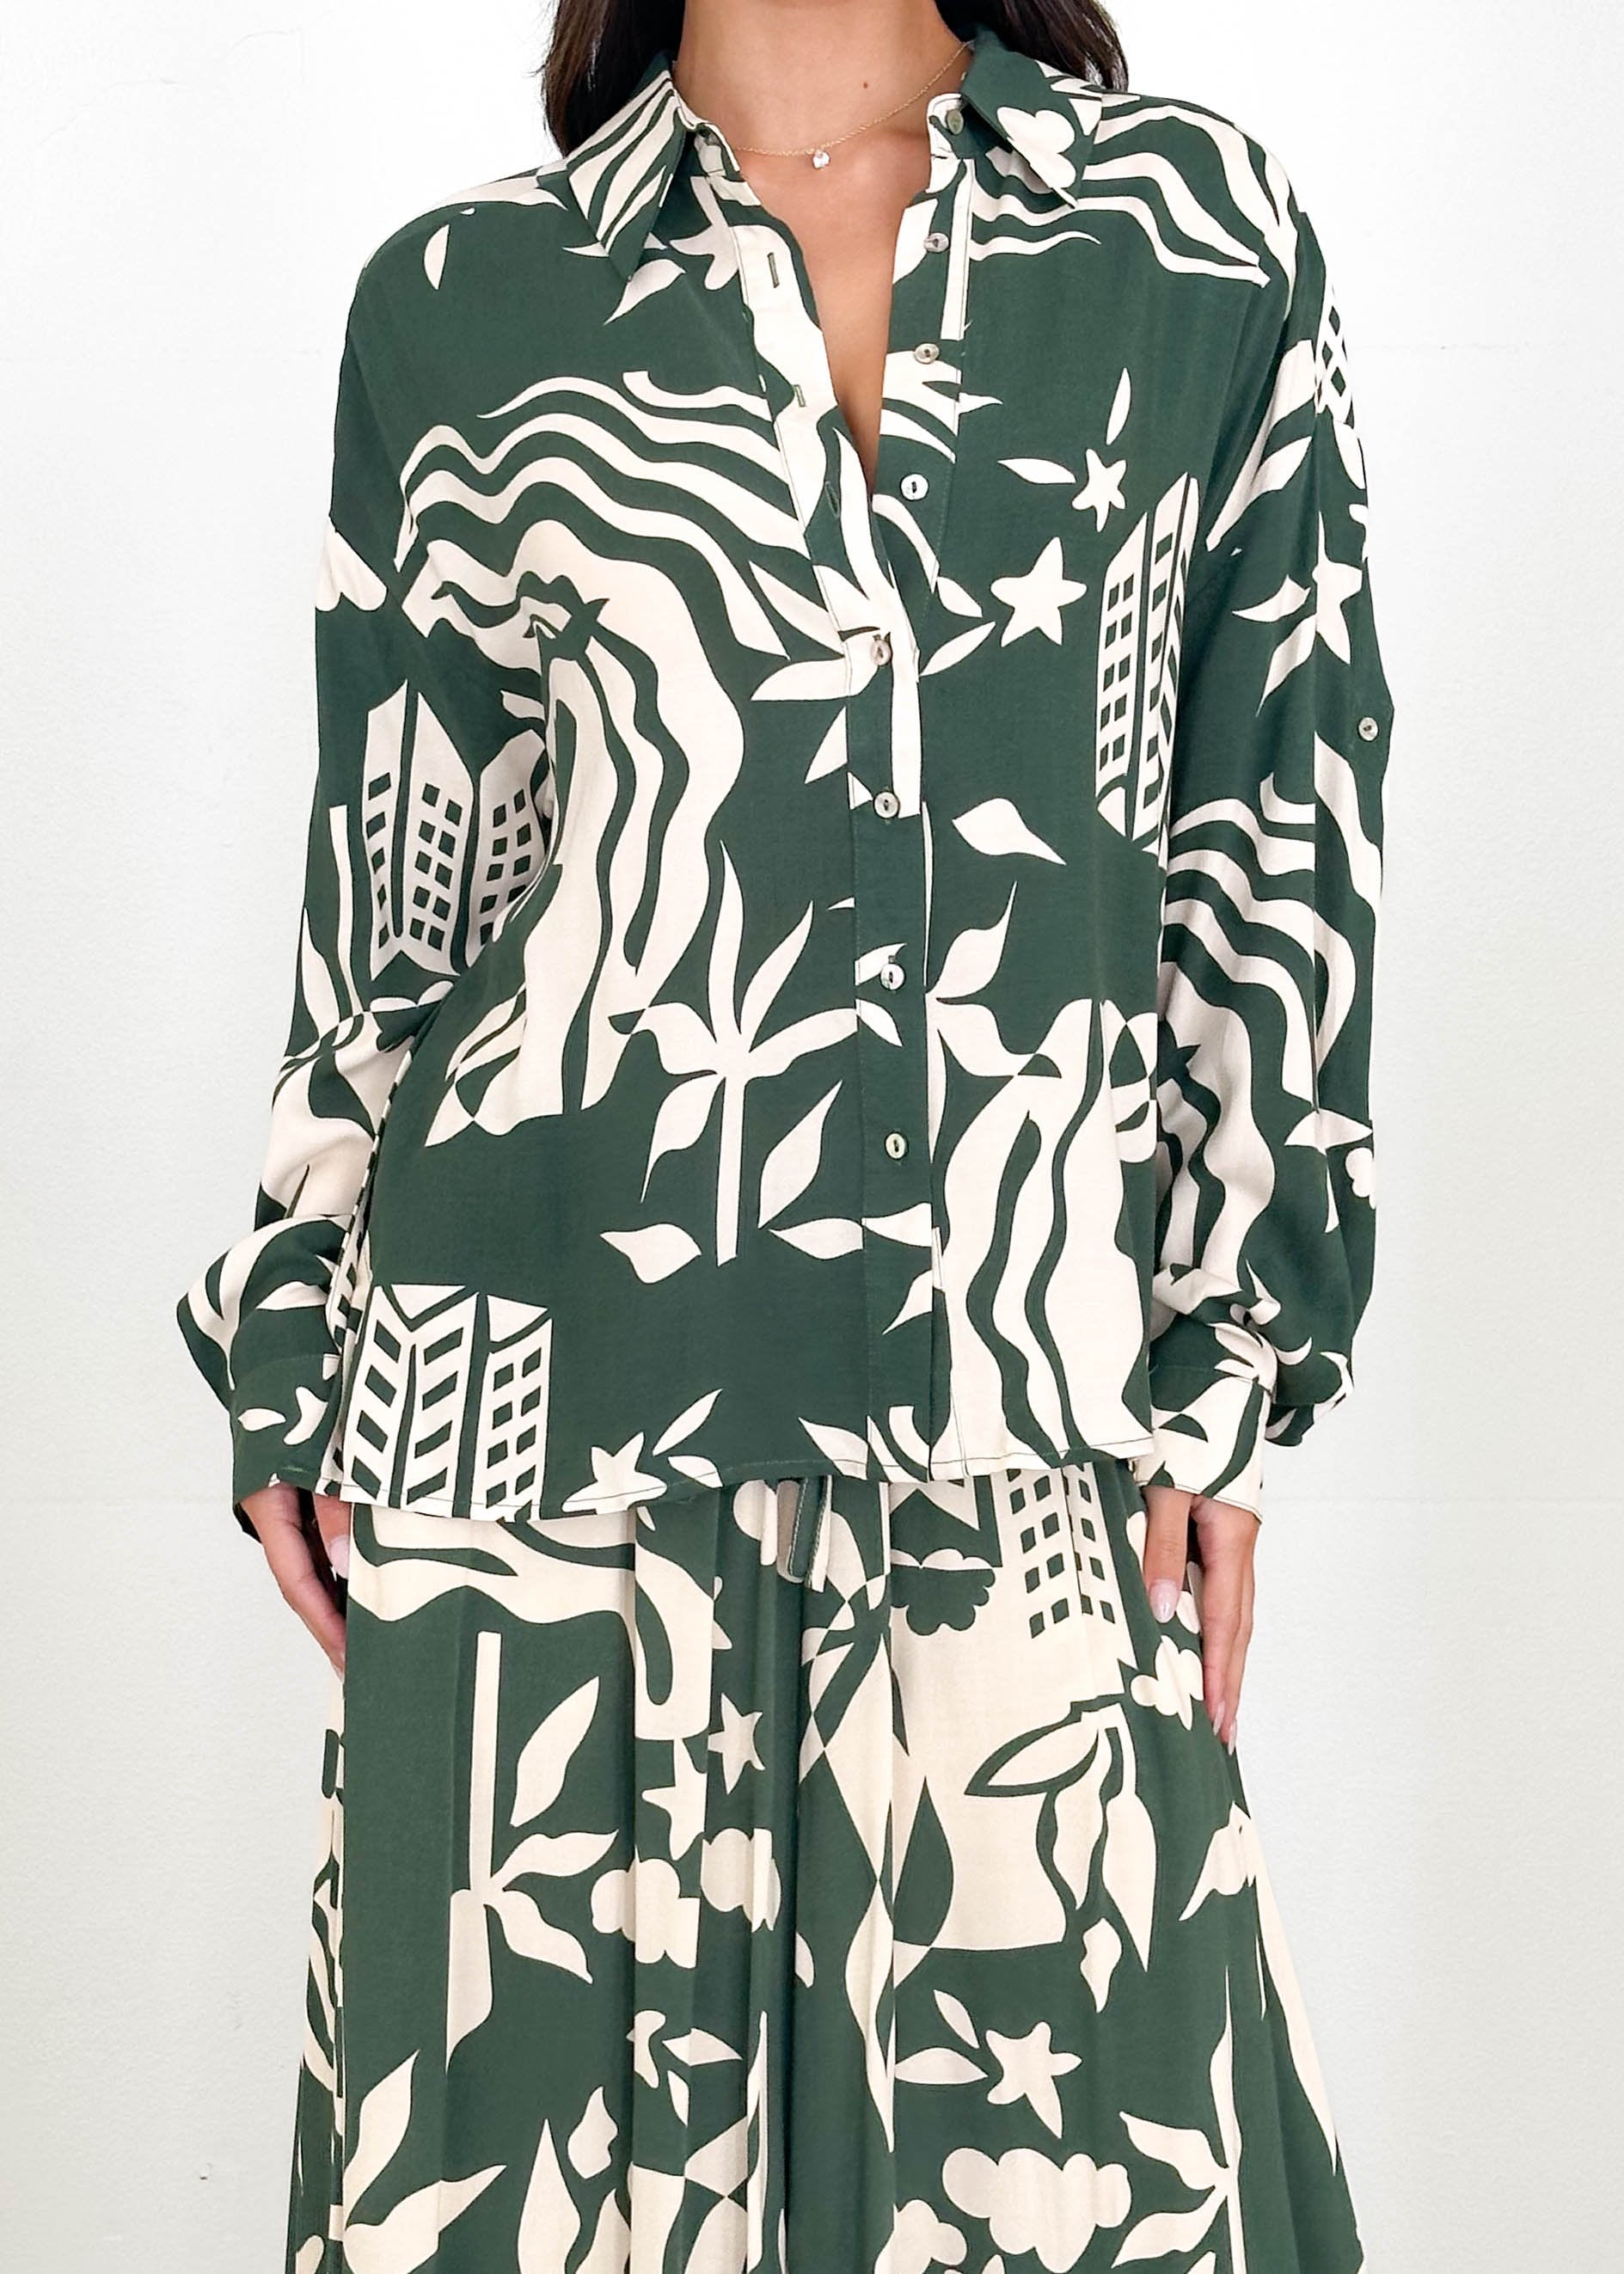 Deanno Shirt - Forest Abstract